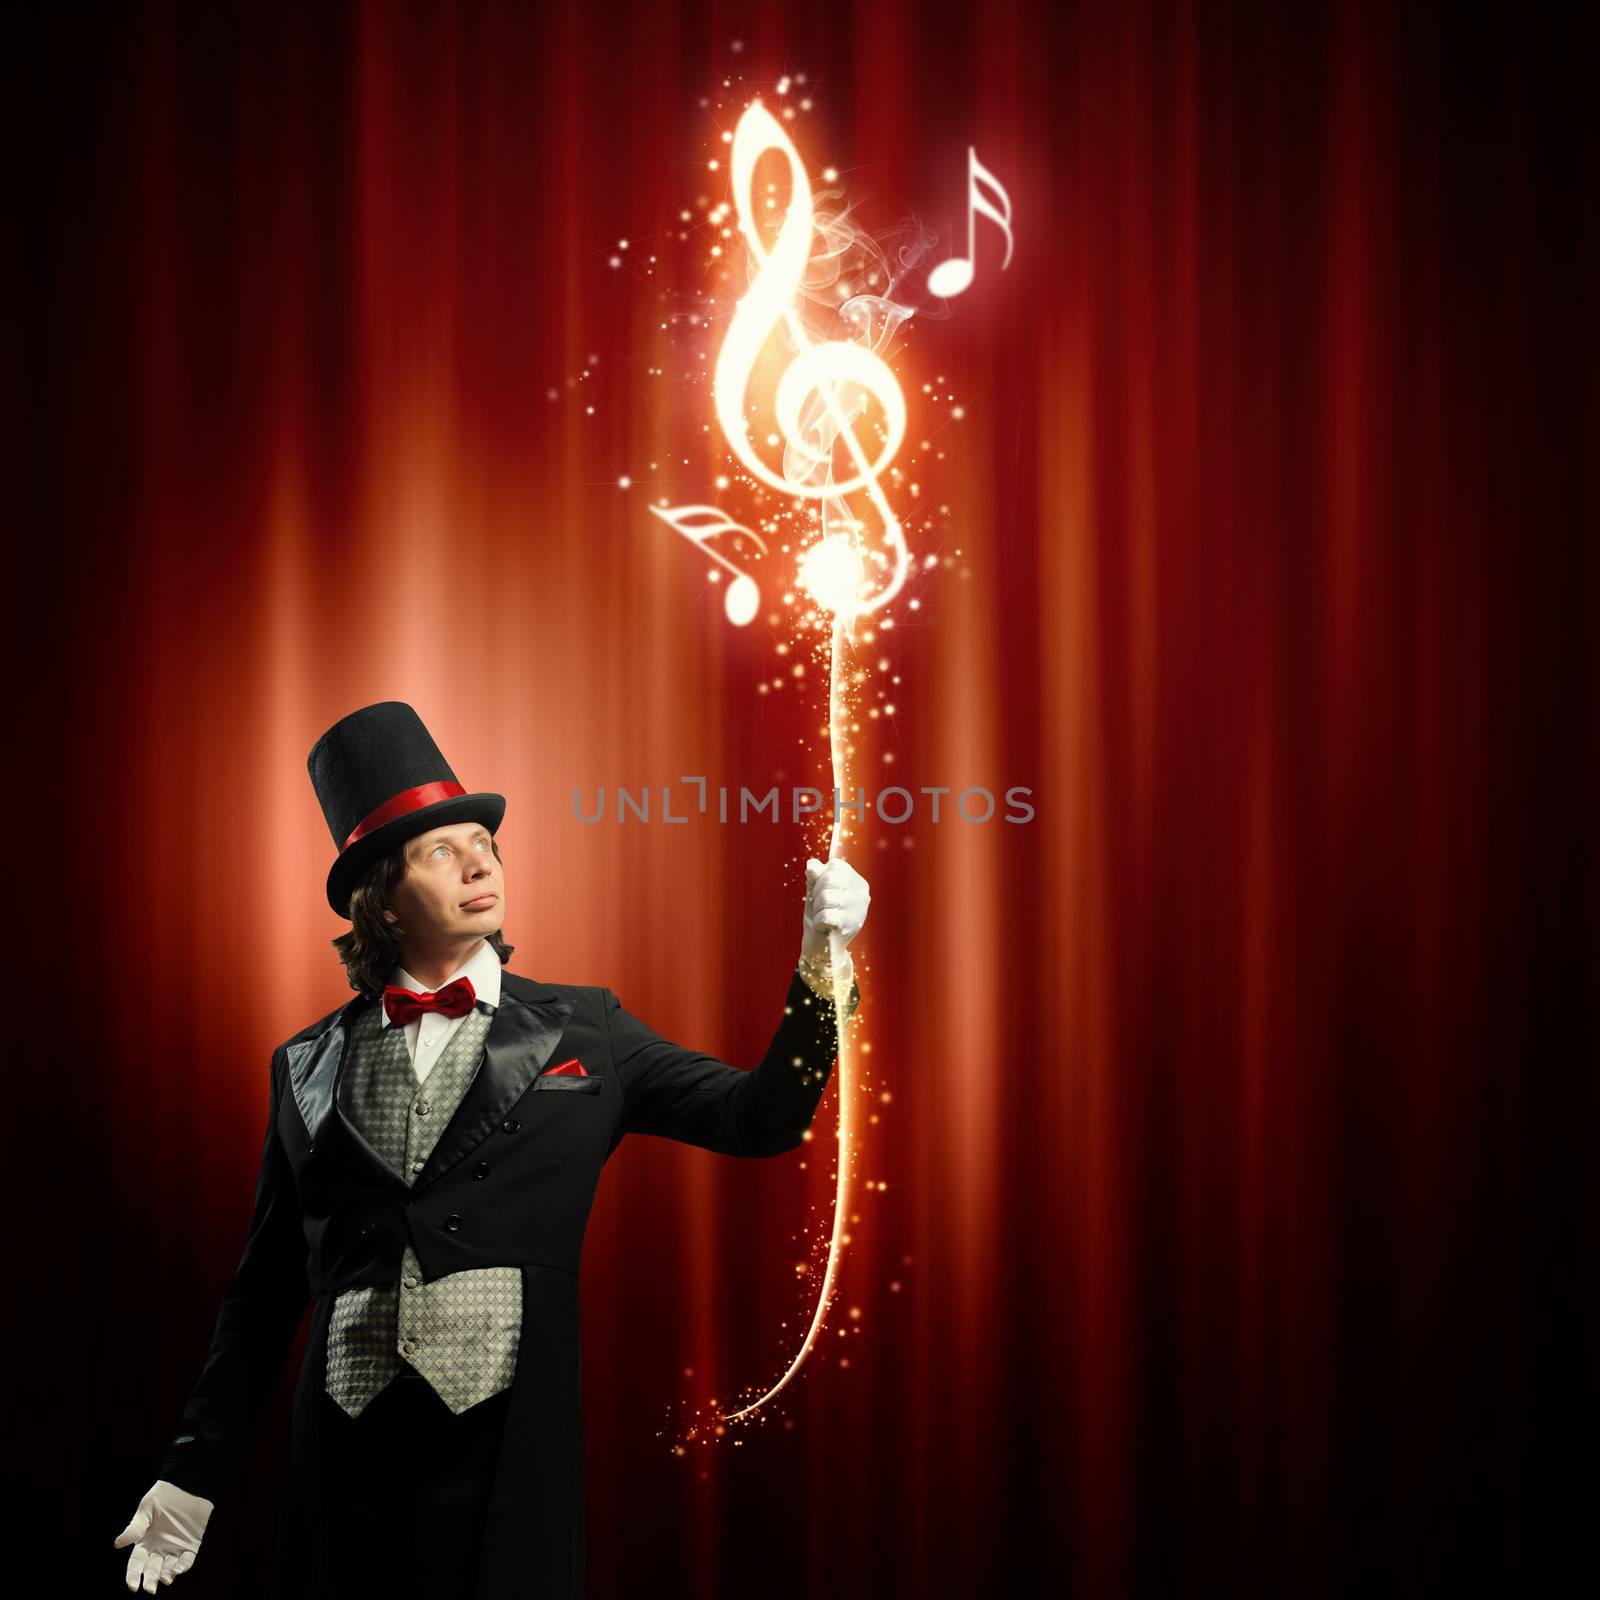 Image of man magician showing trick against color background